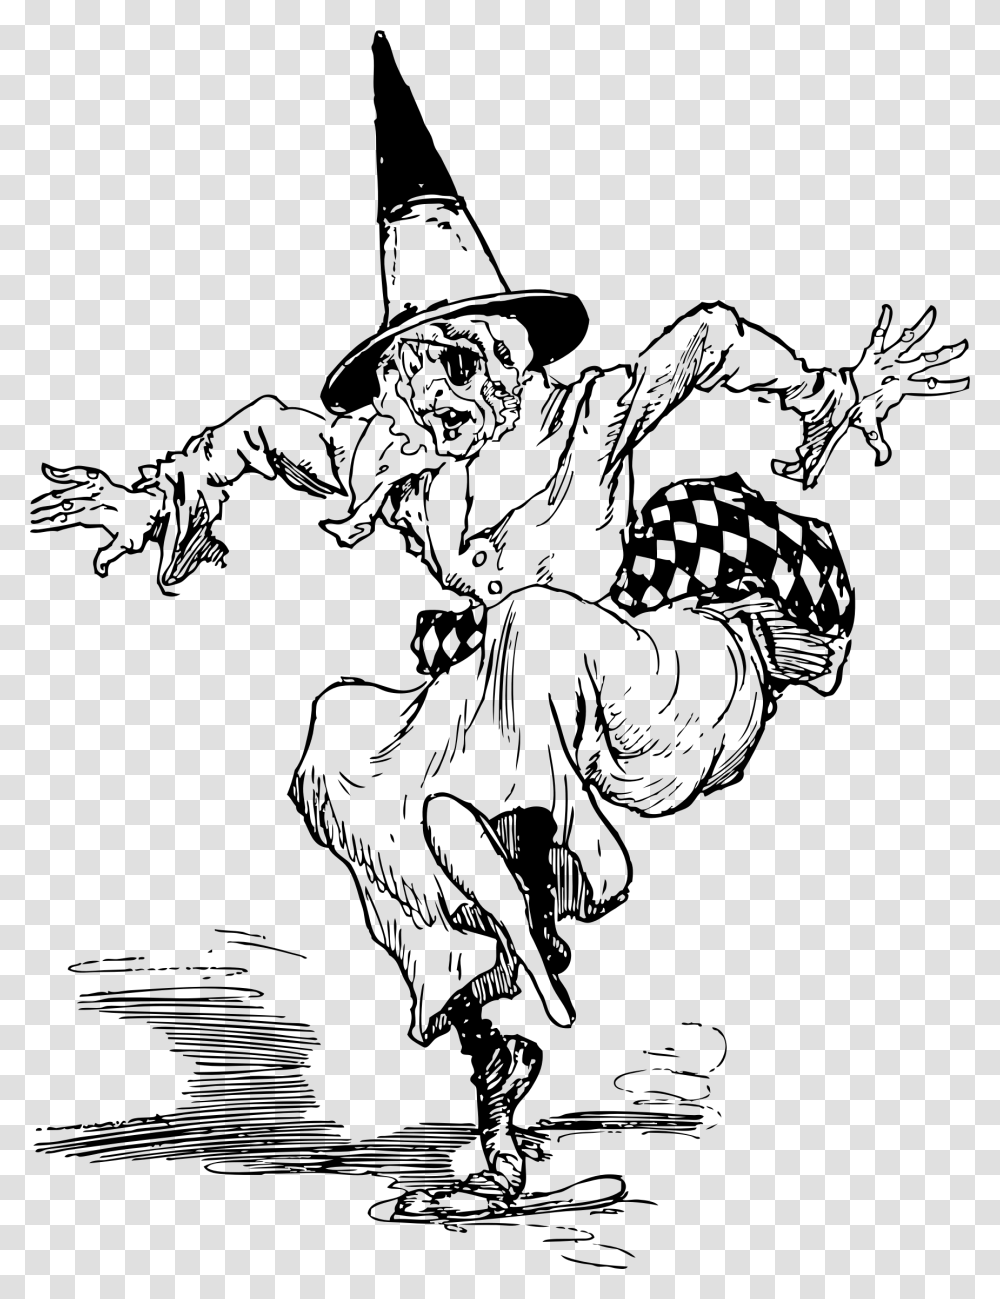 Wicked Witch Of The West The Wizard Wicked Witch Of Wicked Witch Of The West Illustration, Gray, World Of Warcraft Transparent Png